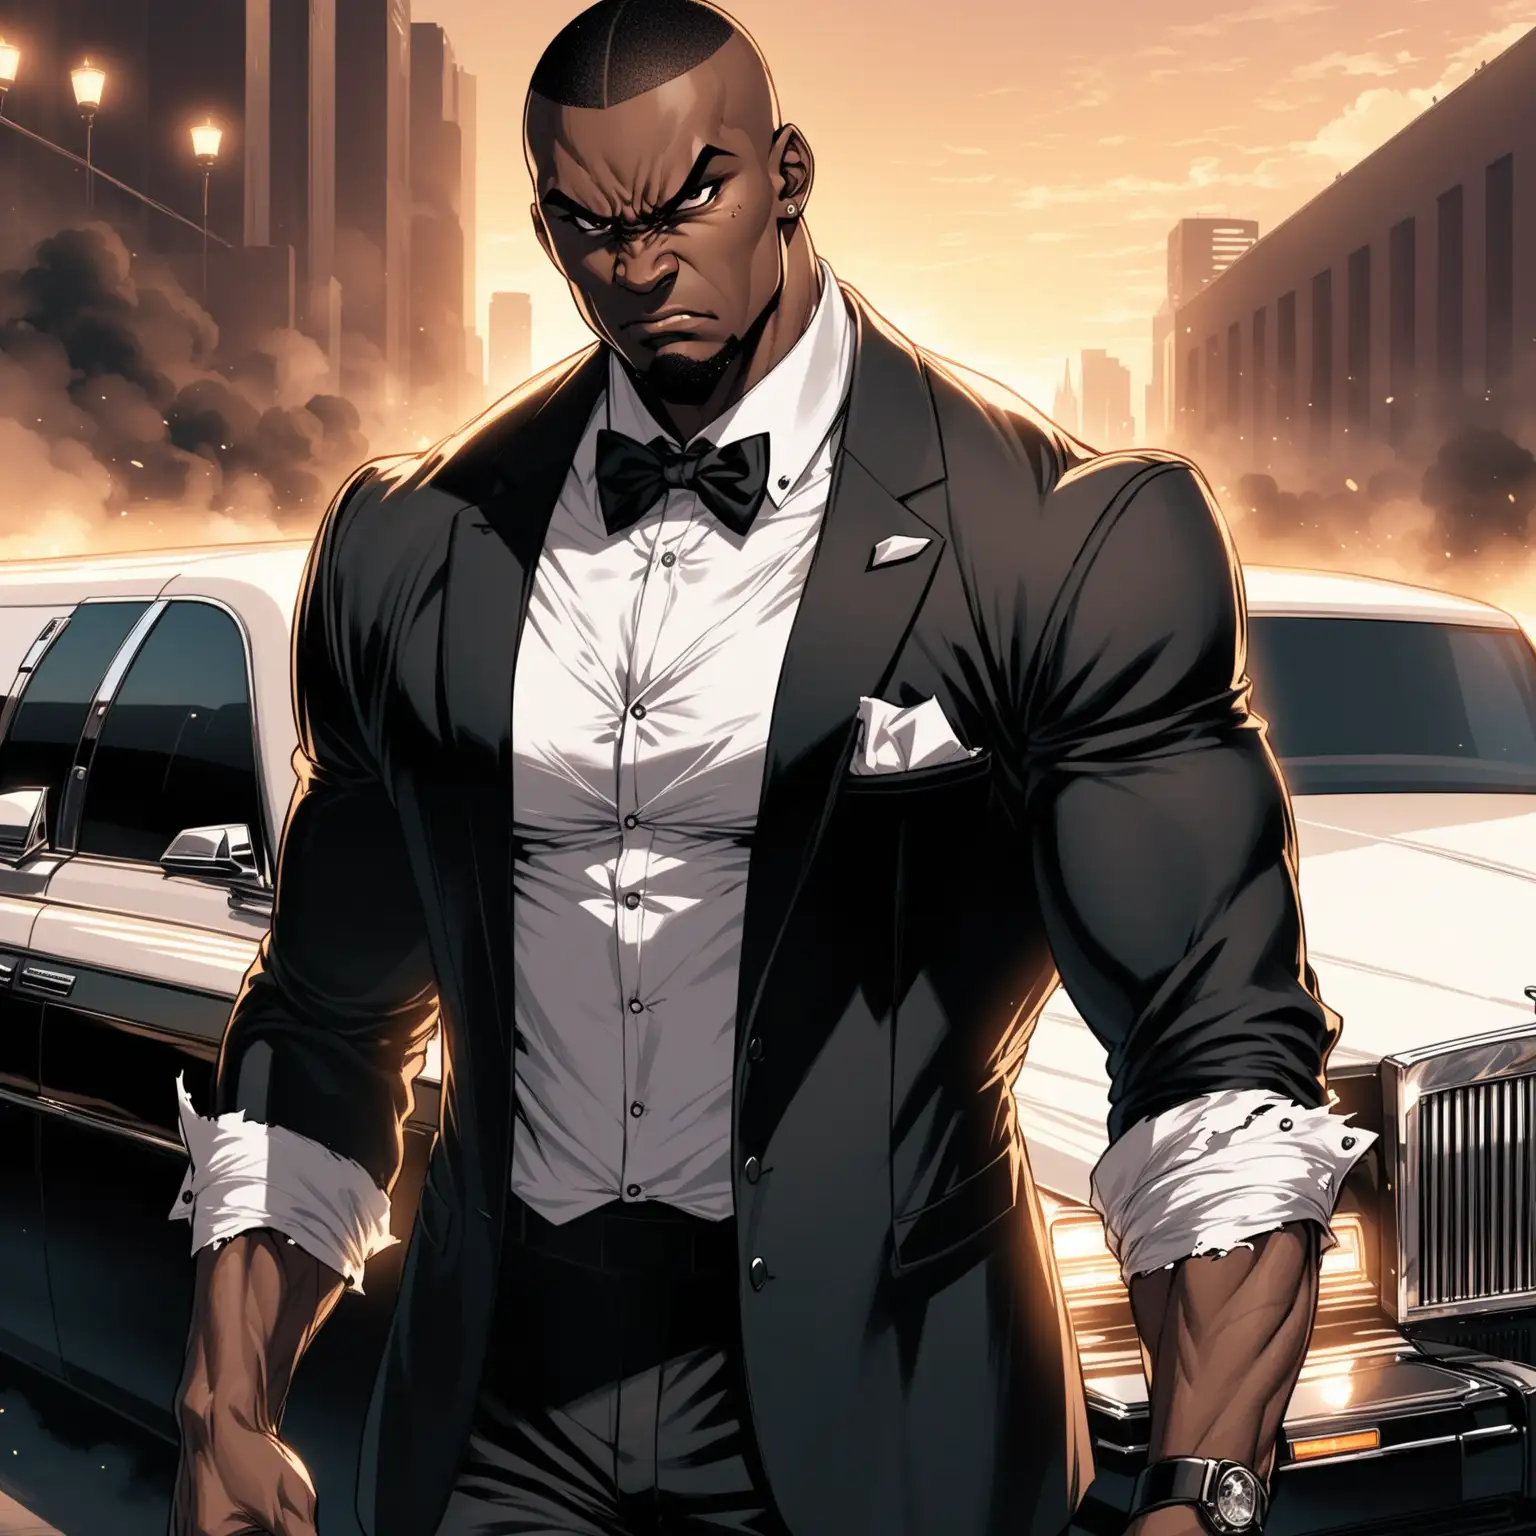 Black Male Limo Driver with a black blazer and white button up shirt with a bowtie and with ripped sleeves he has a lean physique and anger in his eyes looks like he is ready to take on whatever stands in his way  